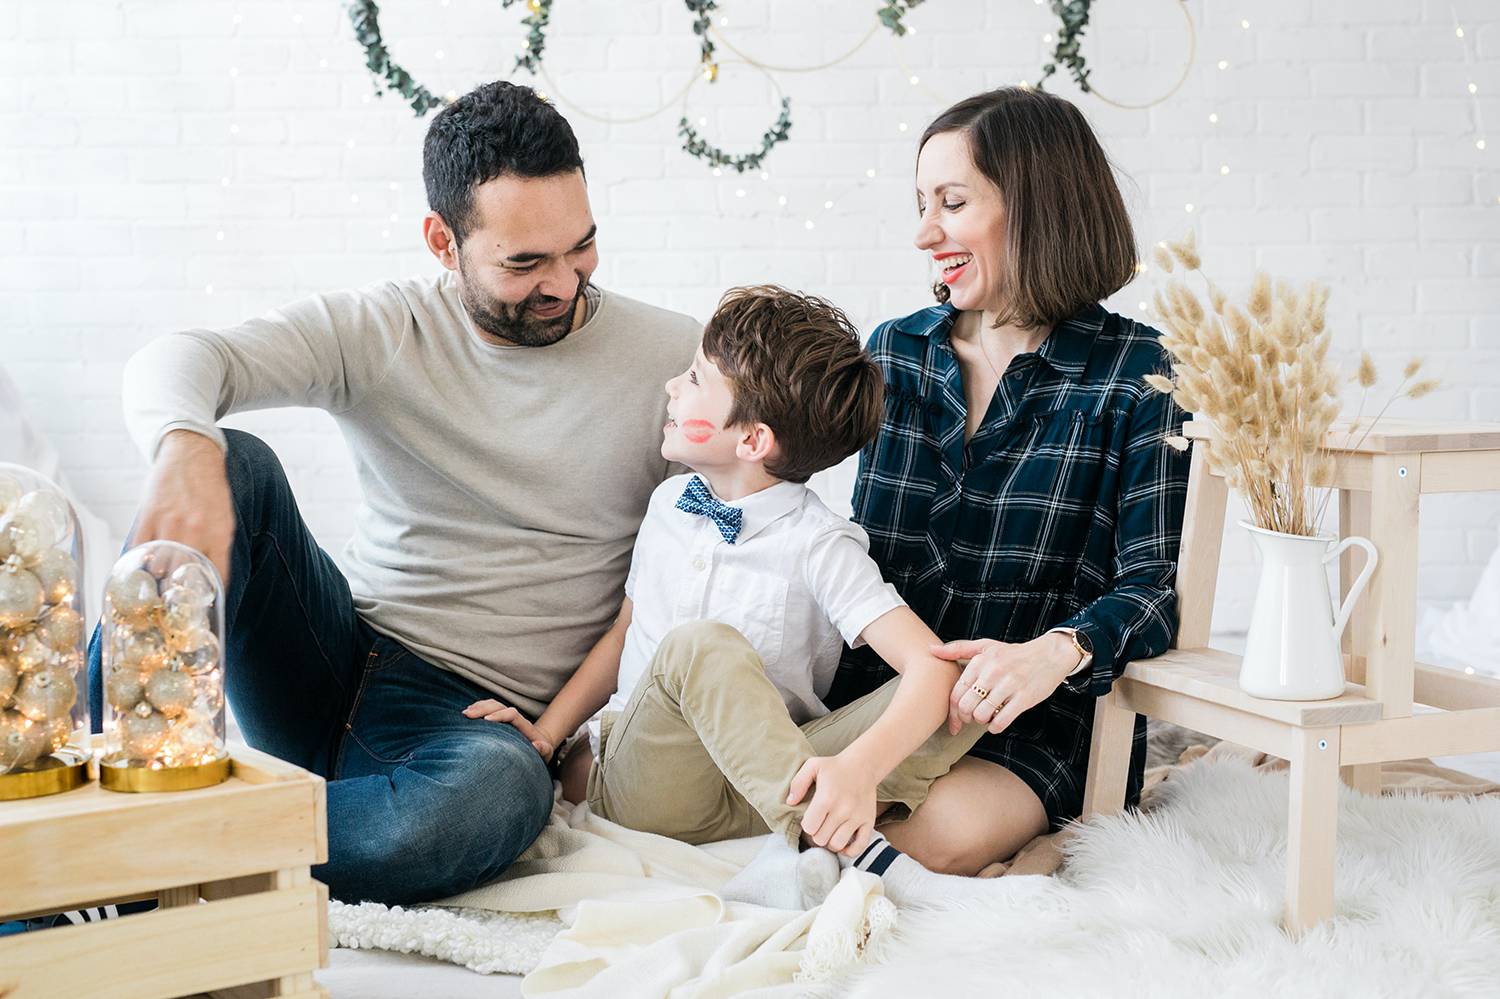 In this photo by Bruna Rico, a dad, mom, and young son sit on a white faux fur in a white room. Ropes of garland are hung behind them, and small wooden crates sit beside them holding gold ornaments. Christmas Mini Session: Ideas Families will ADORE!